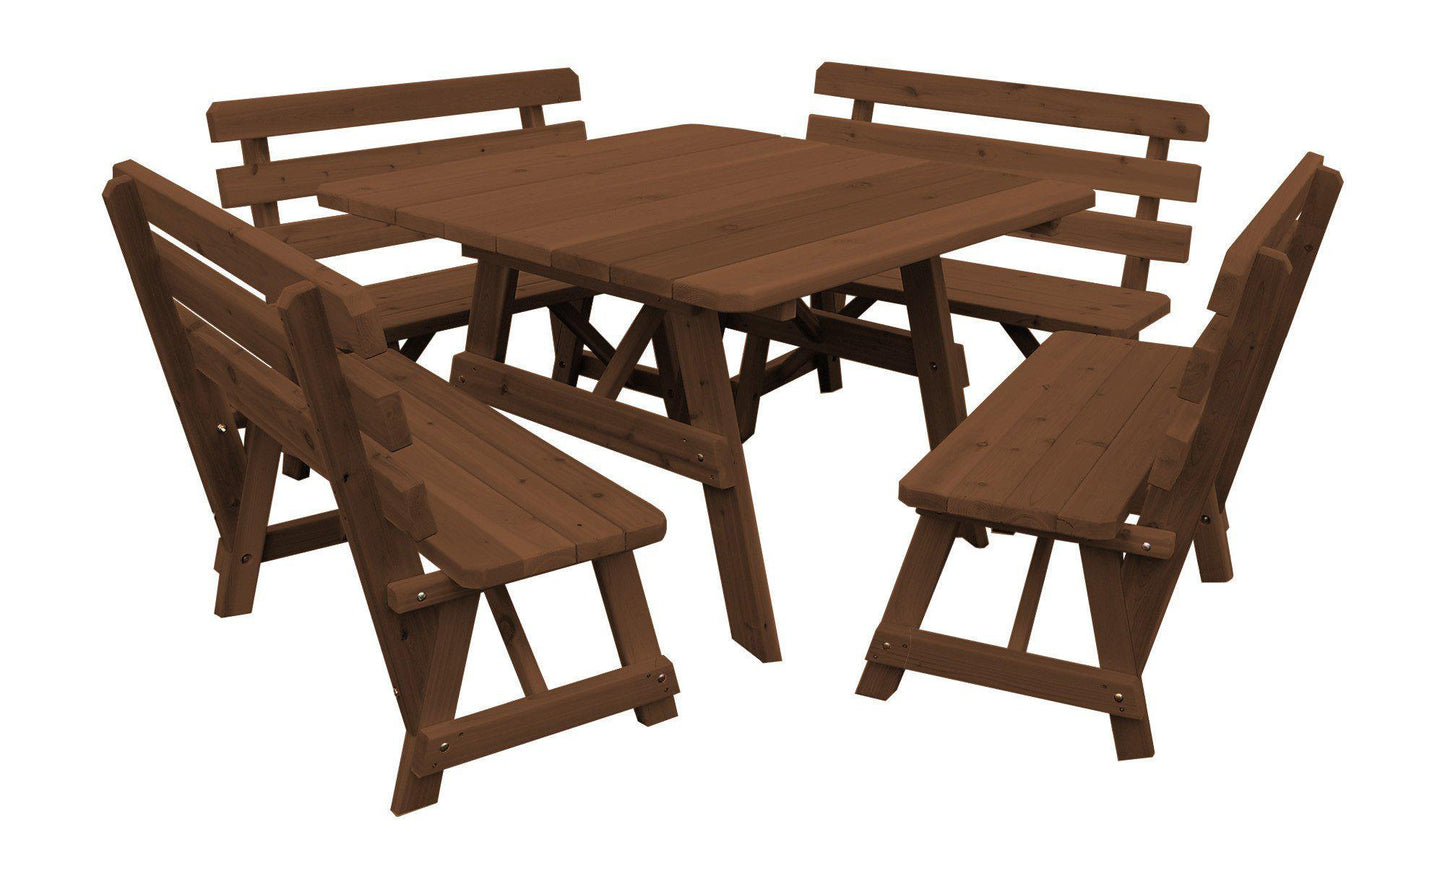 A&L FURNITURE CO. Western Red Cedar 43" Square Table w/ 4 Backed Benches- Specify for FREE 2" Umbrella Hole - LEAD TIME TO SHIP 4 WEEKS OR LESS